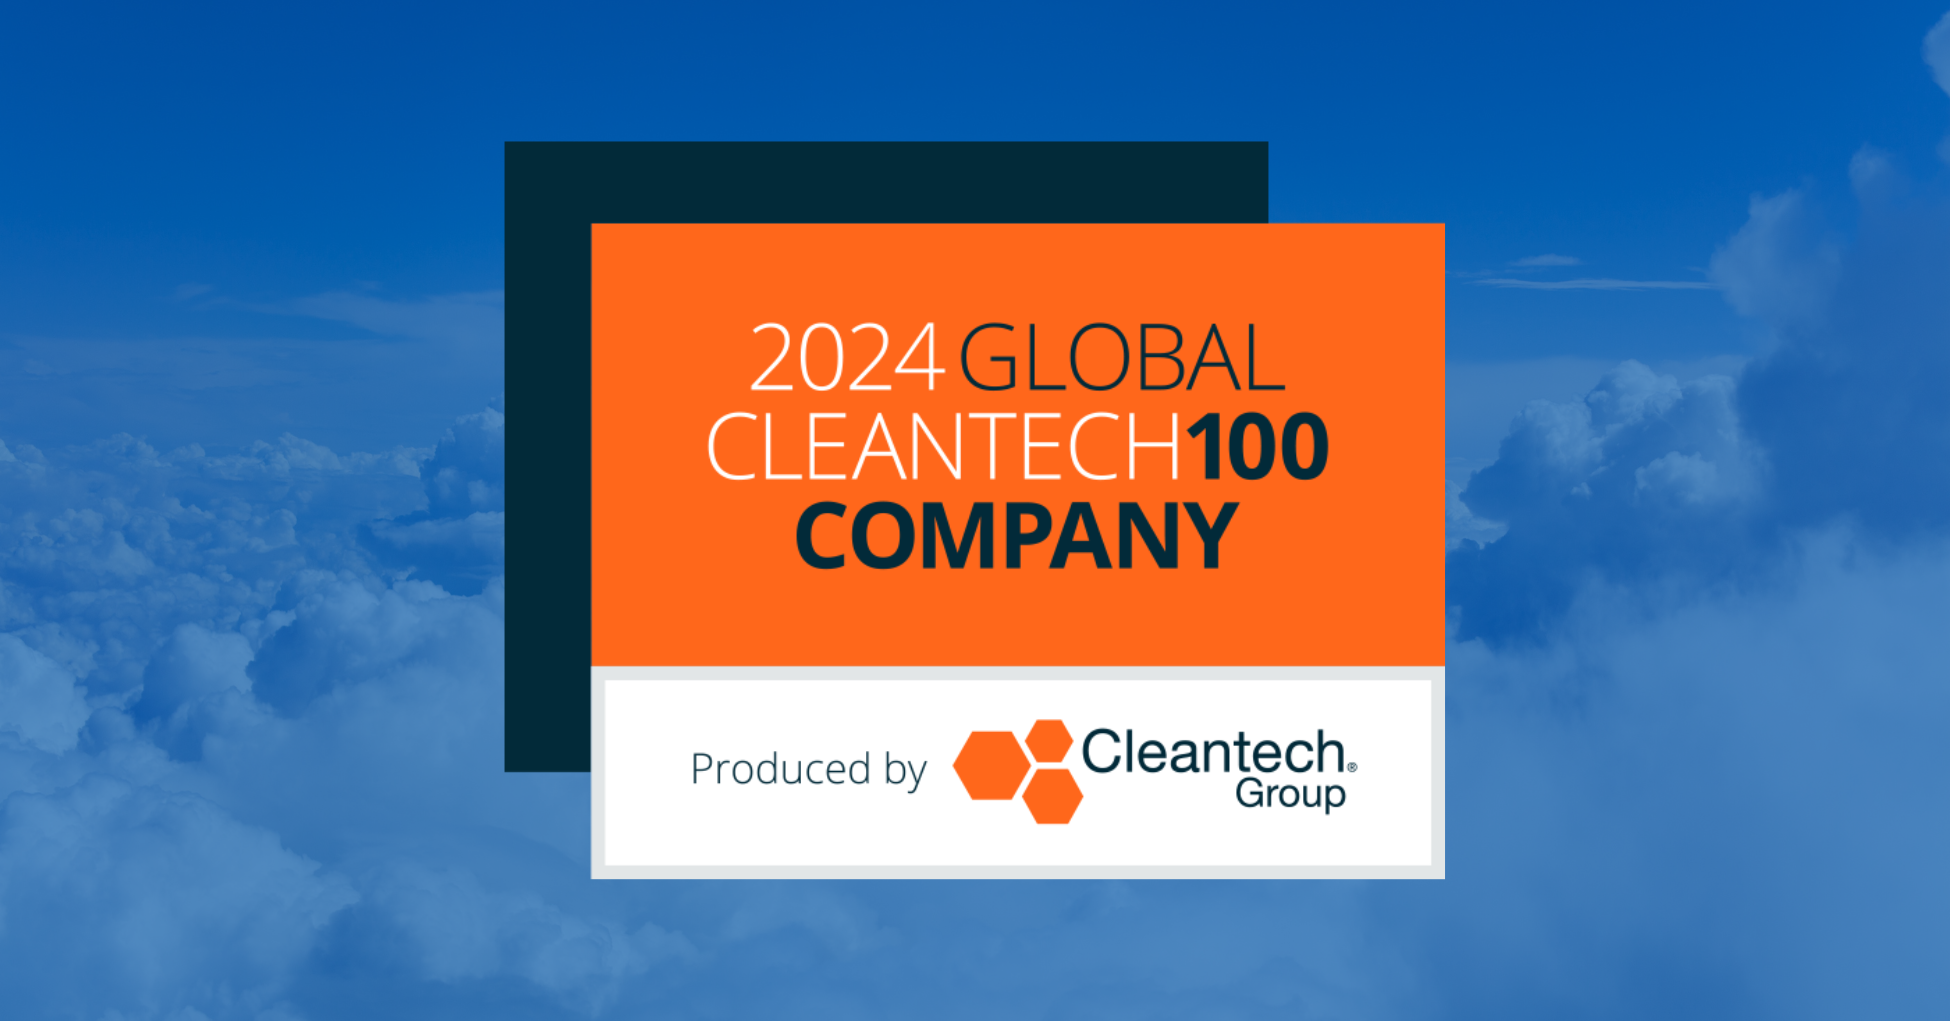 Fifth feature for Carbon Clean in the Global Cleantech 100